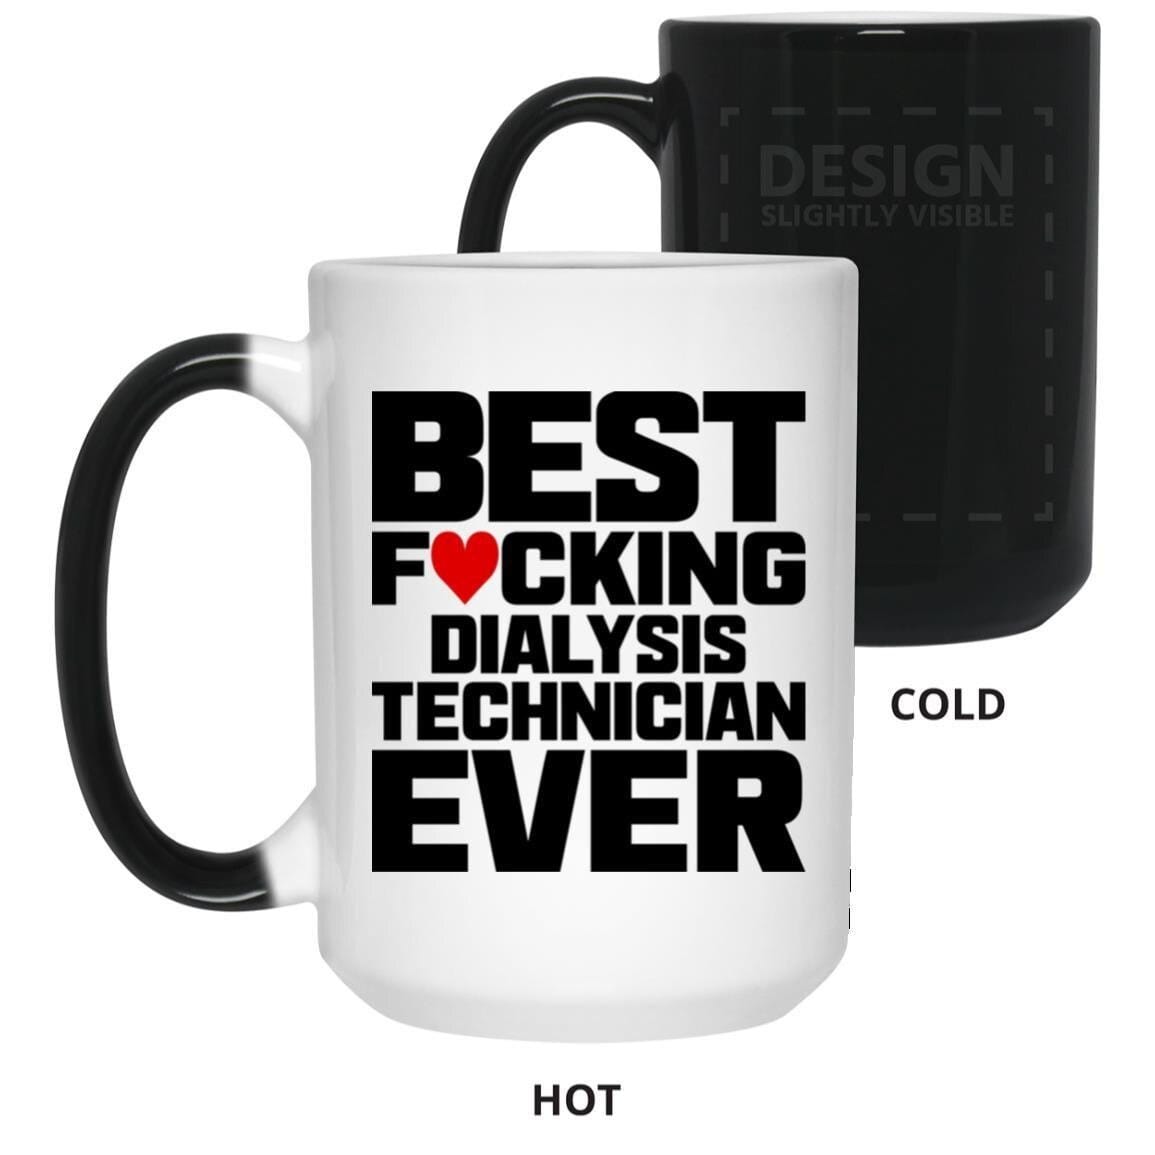 Best Fucking Dialysis Technician Ever (Coffee Mugs) Funny Gift for Nephrology Kidney Techs 15 oz. Color Changing Mug / White